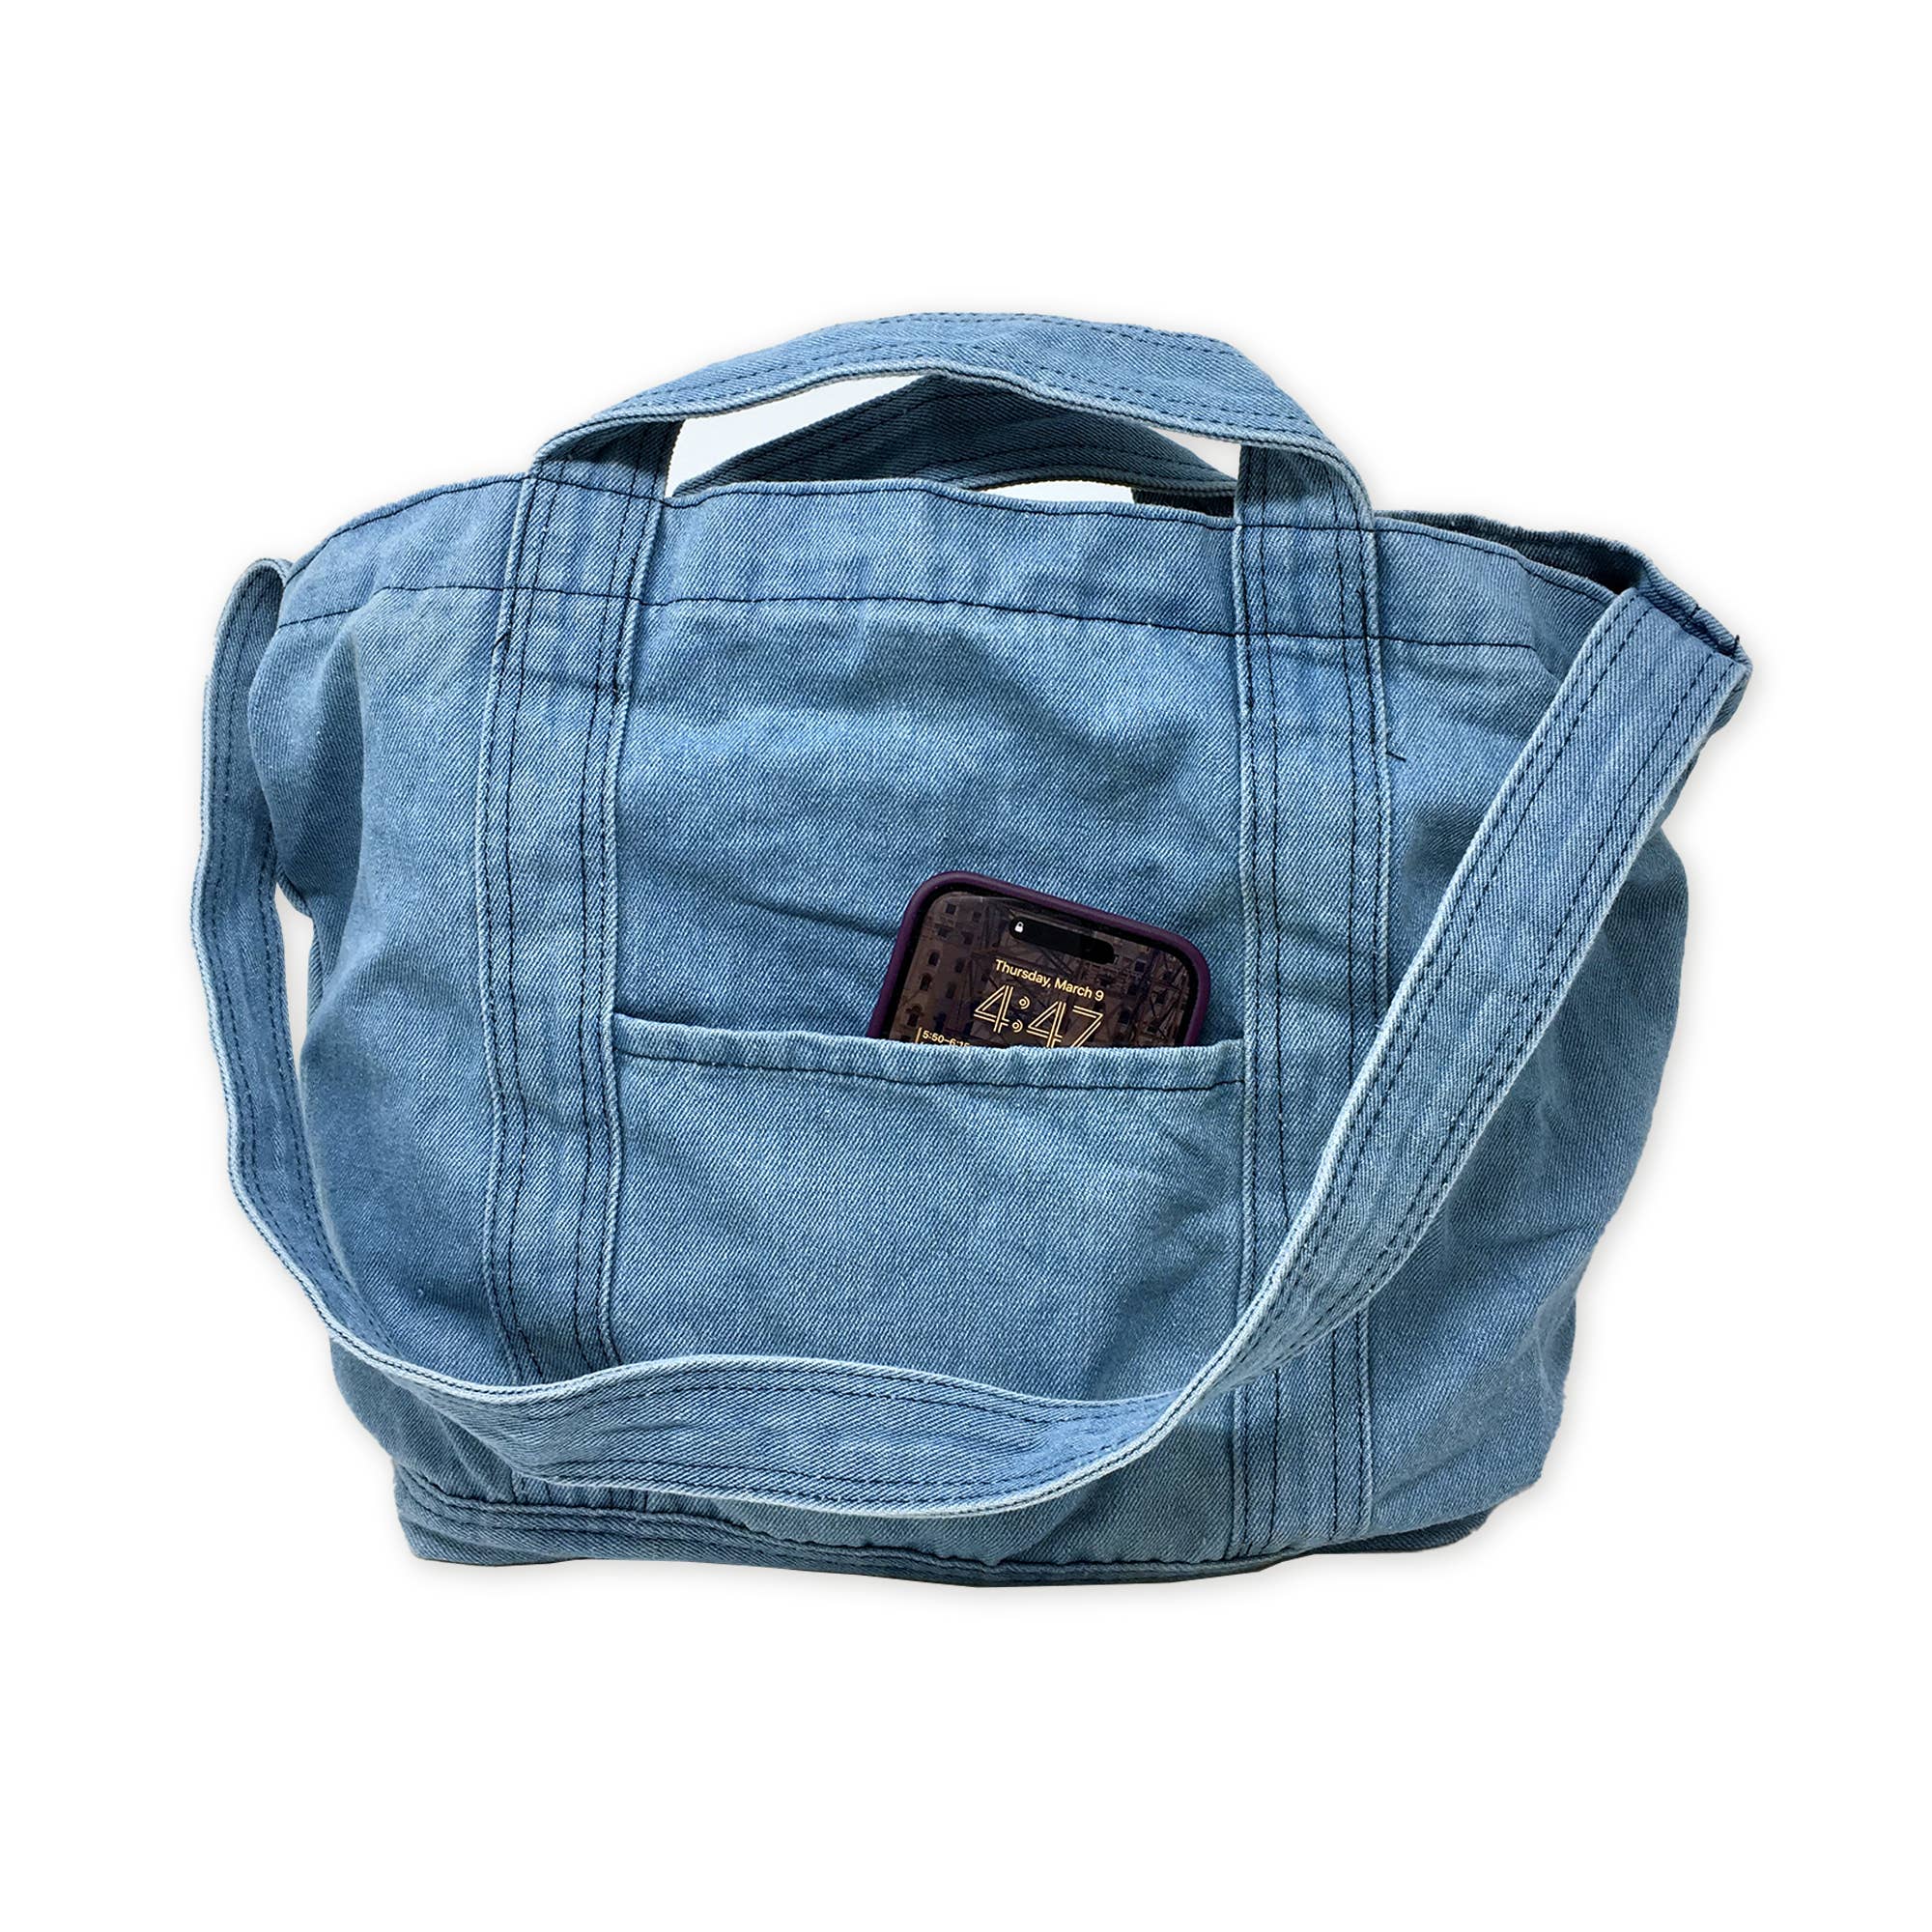 Full Of Snacks Shopping Bag By Pretty Pickled | notonthehighstreet.com